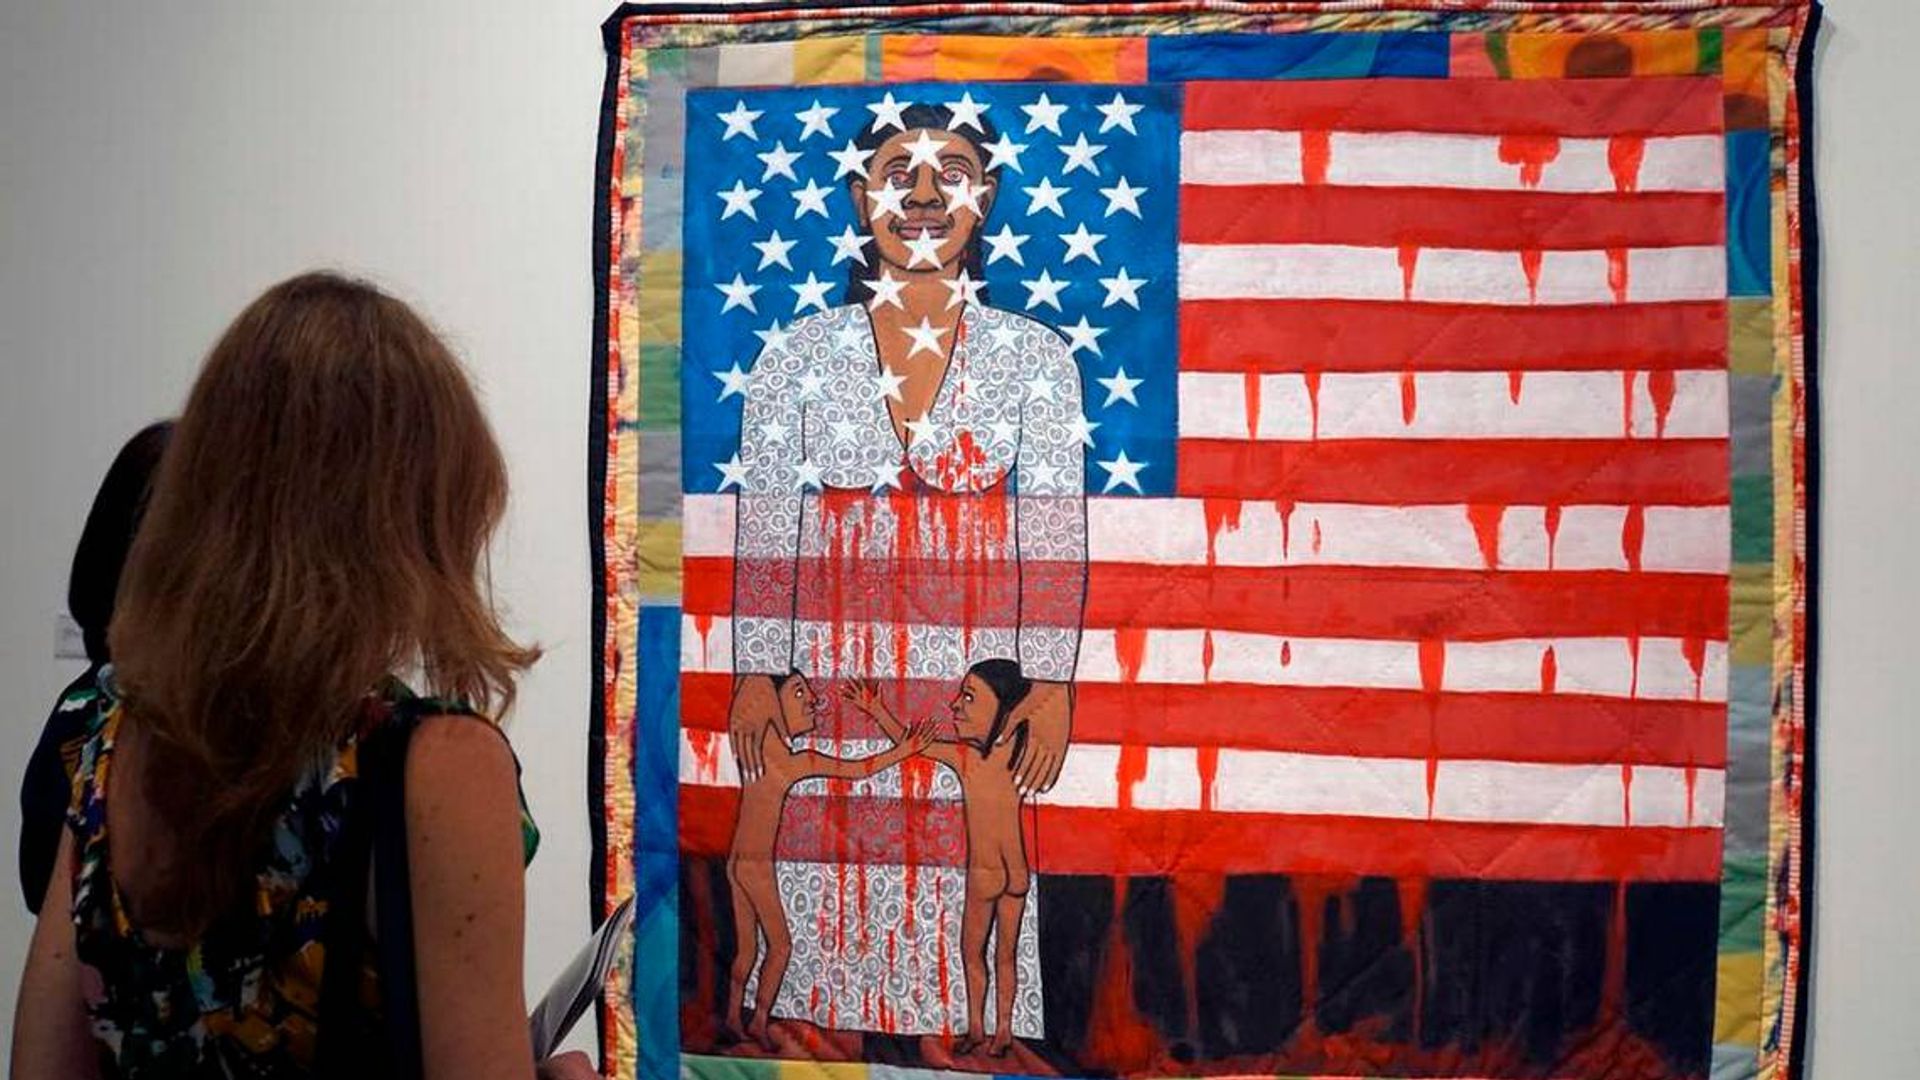 A fair-goer looks at the work of US artist Faith Ringgold, “The Flag is Bleeding 2” (1997), during a preview day of Art Basel in Miami Beach in 2019. Shutterstock